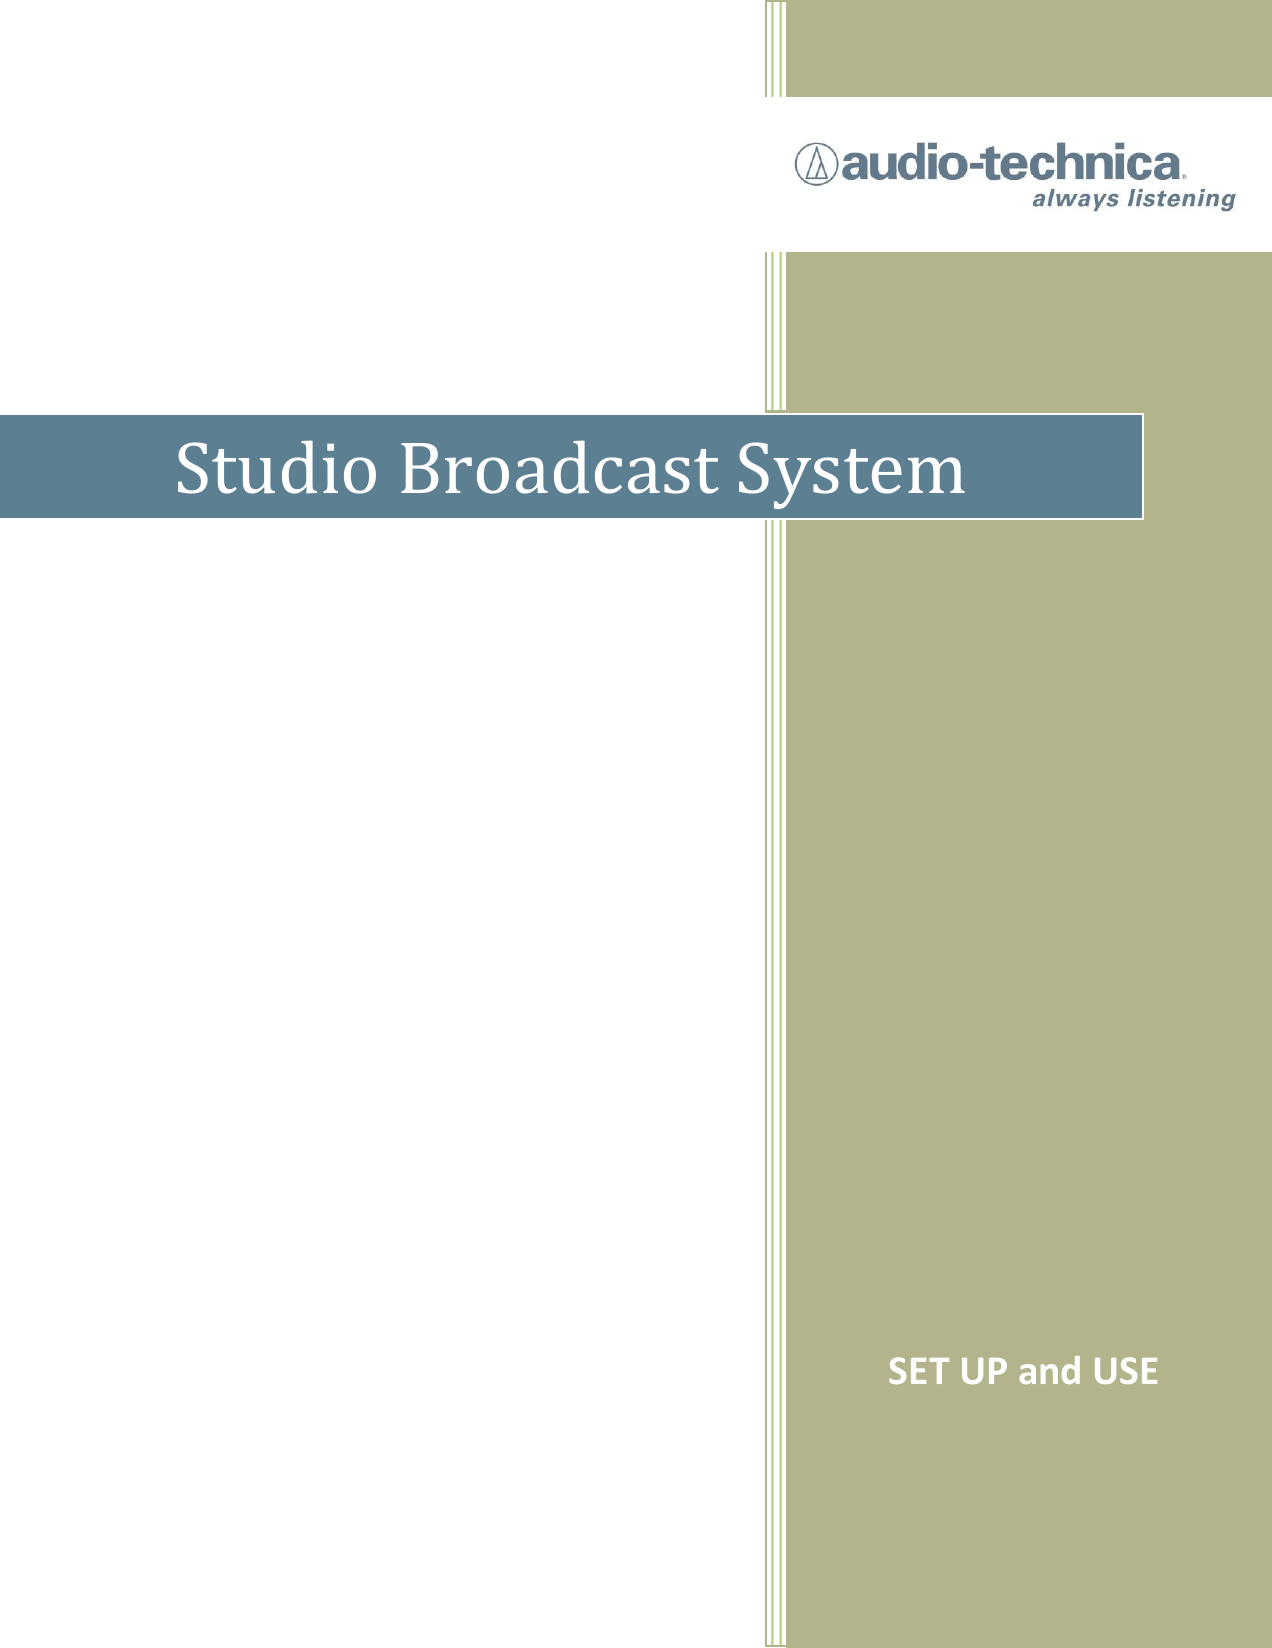      Studio Broadcast System SET UP and USE  